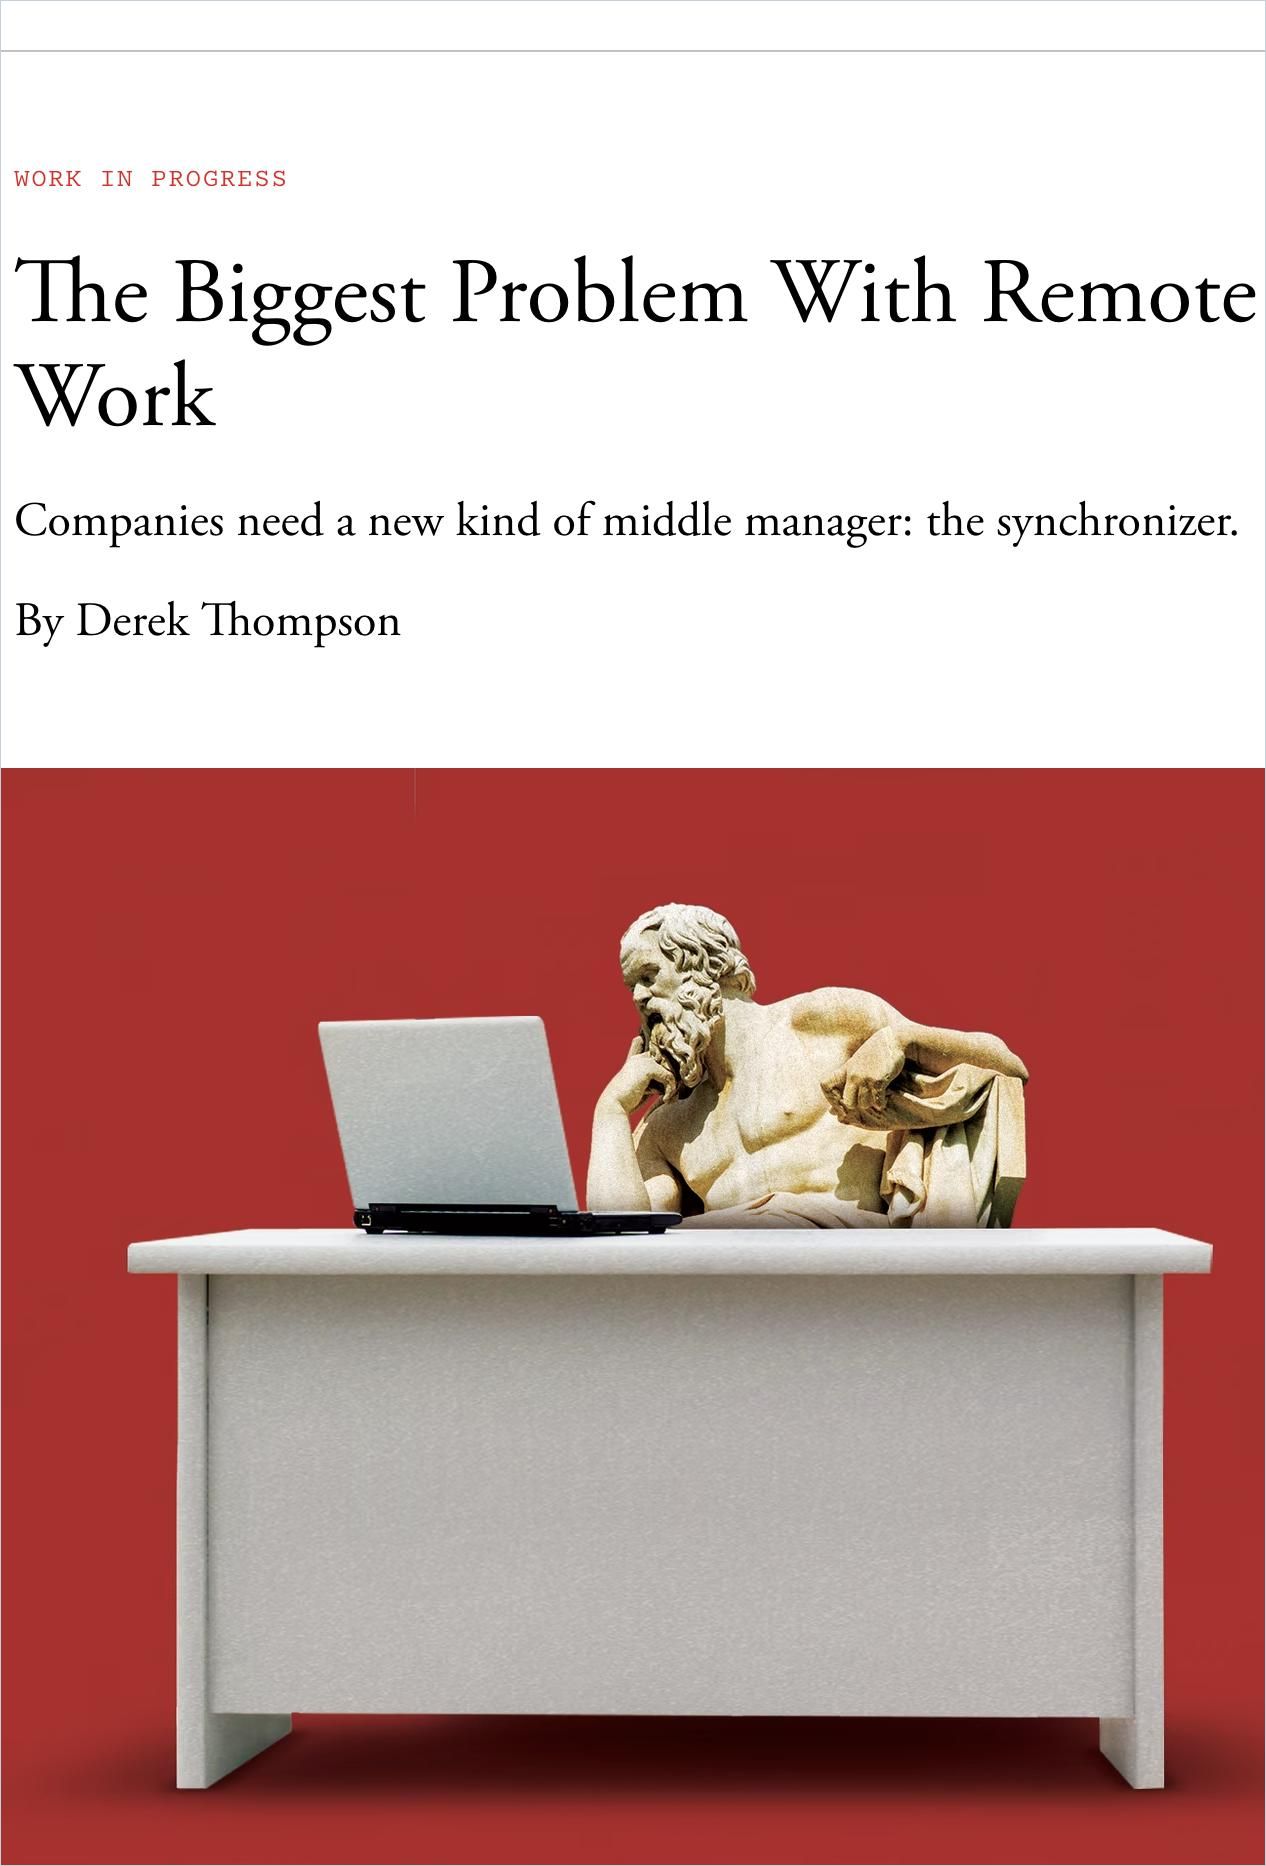 Image of: The biggest problem with remote work